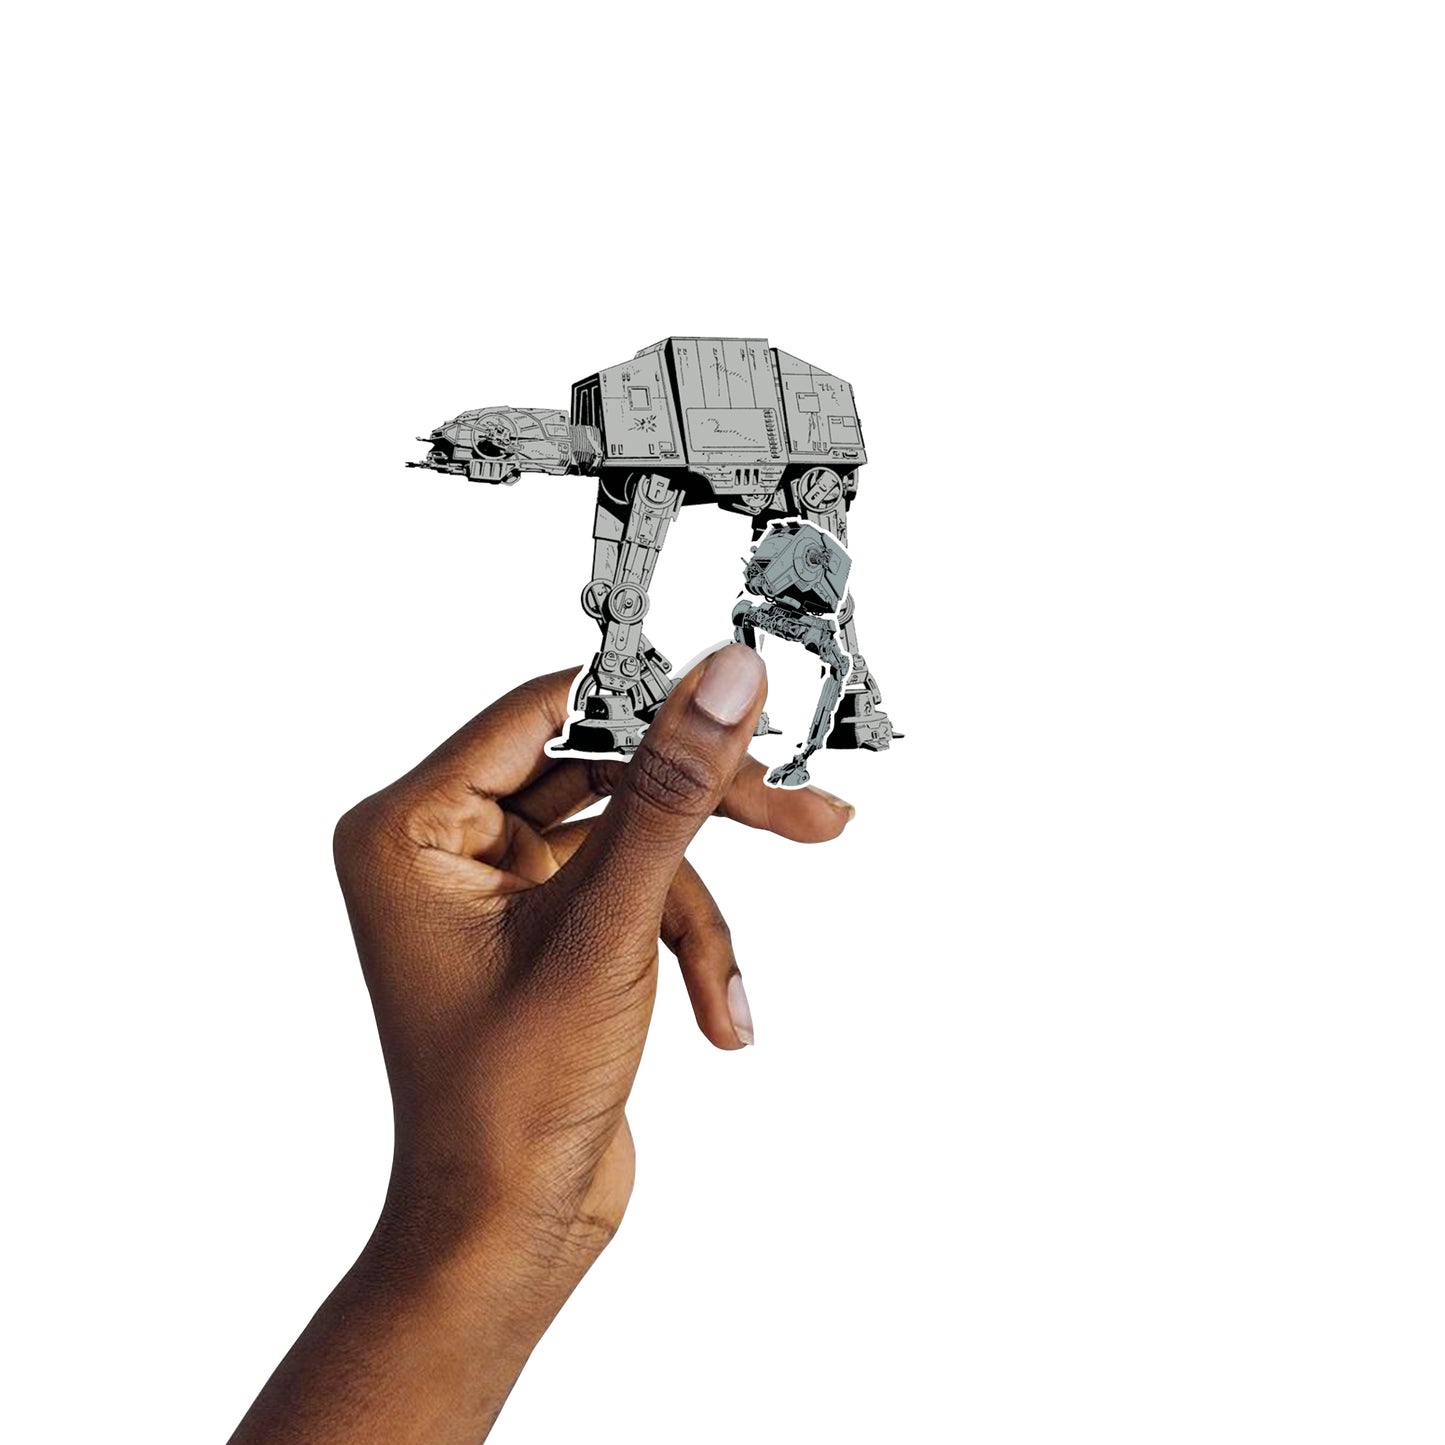 Sheet of 5 - Imperial Walkers Minis        - Officially Licensed Star Wars Removable    Adhesive Decal